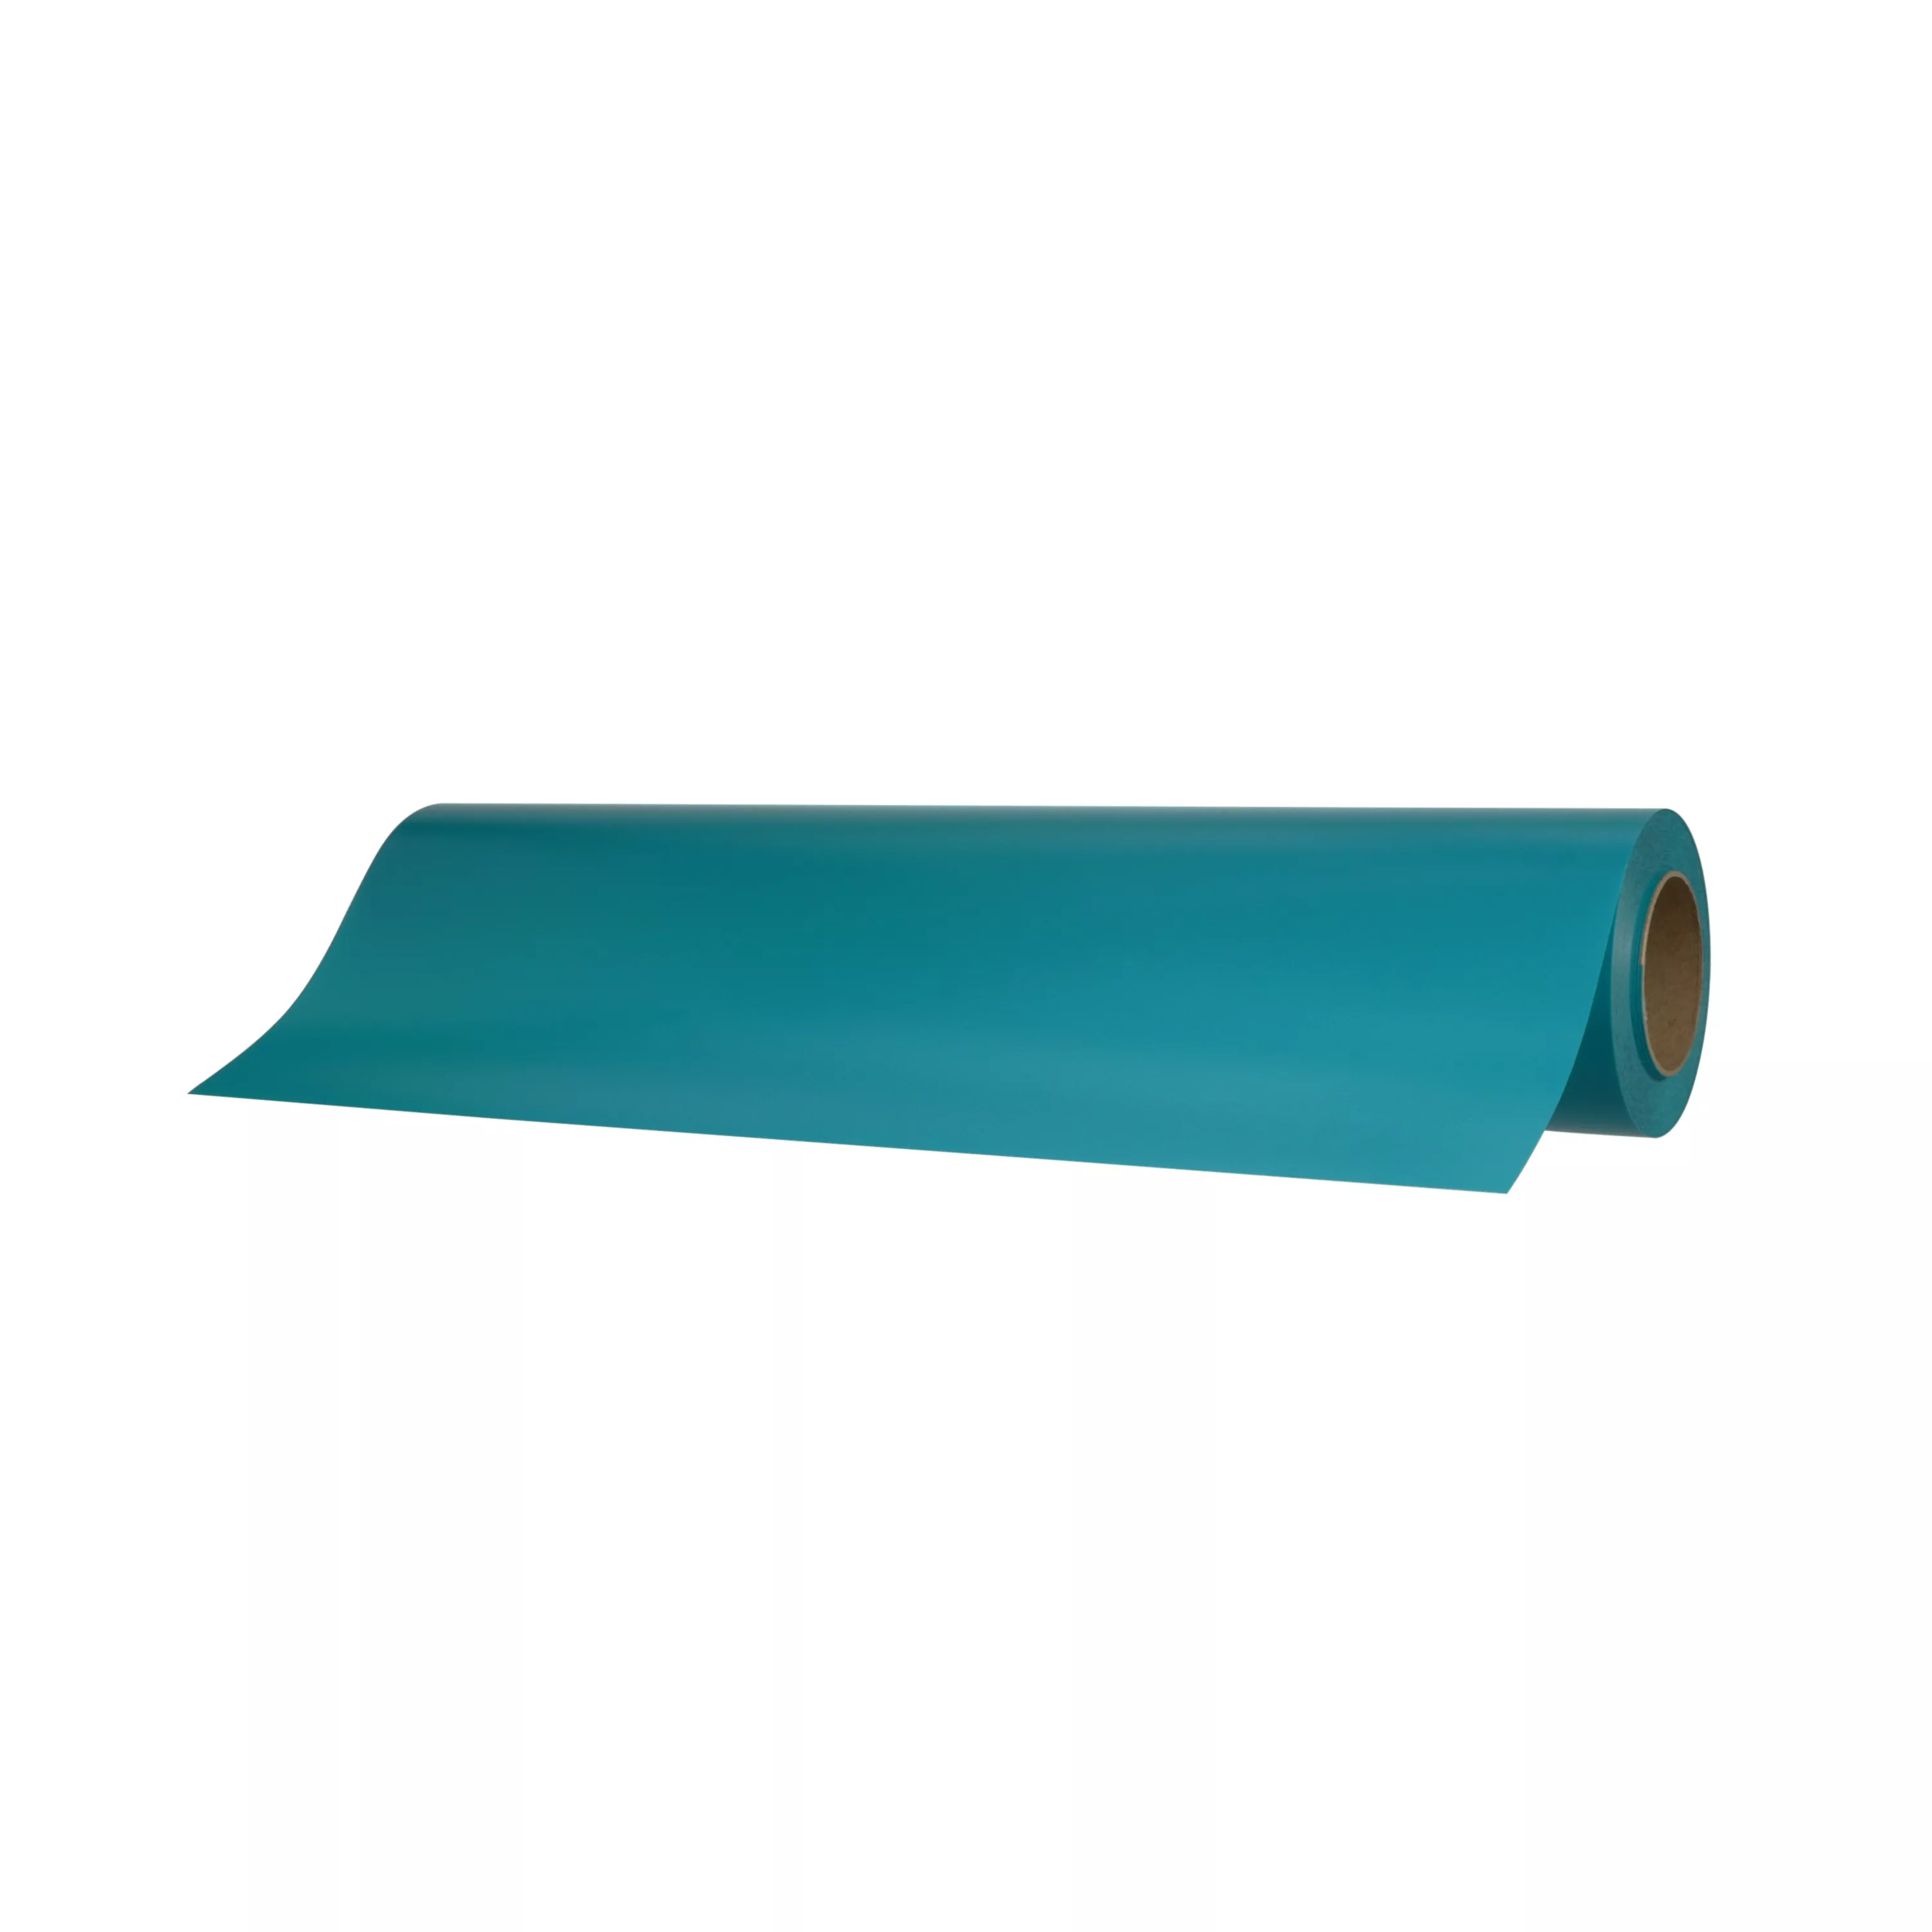 3M™ Envision™ Translucent Film Series 3730-246L, Teal Green, 48 in x 50
yd